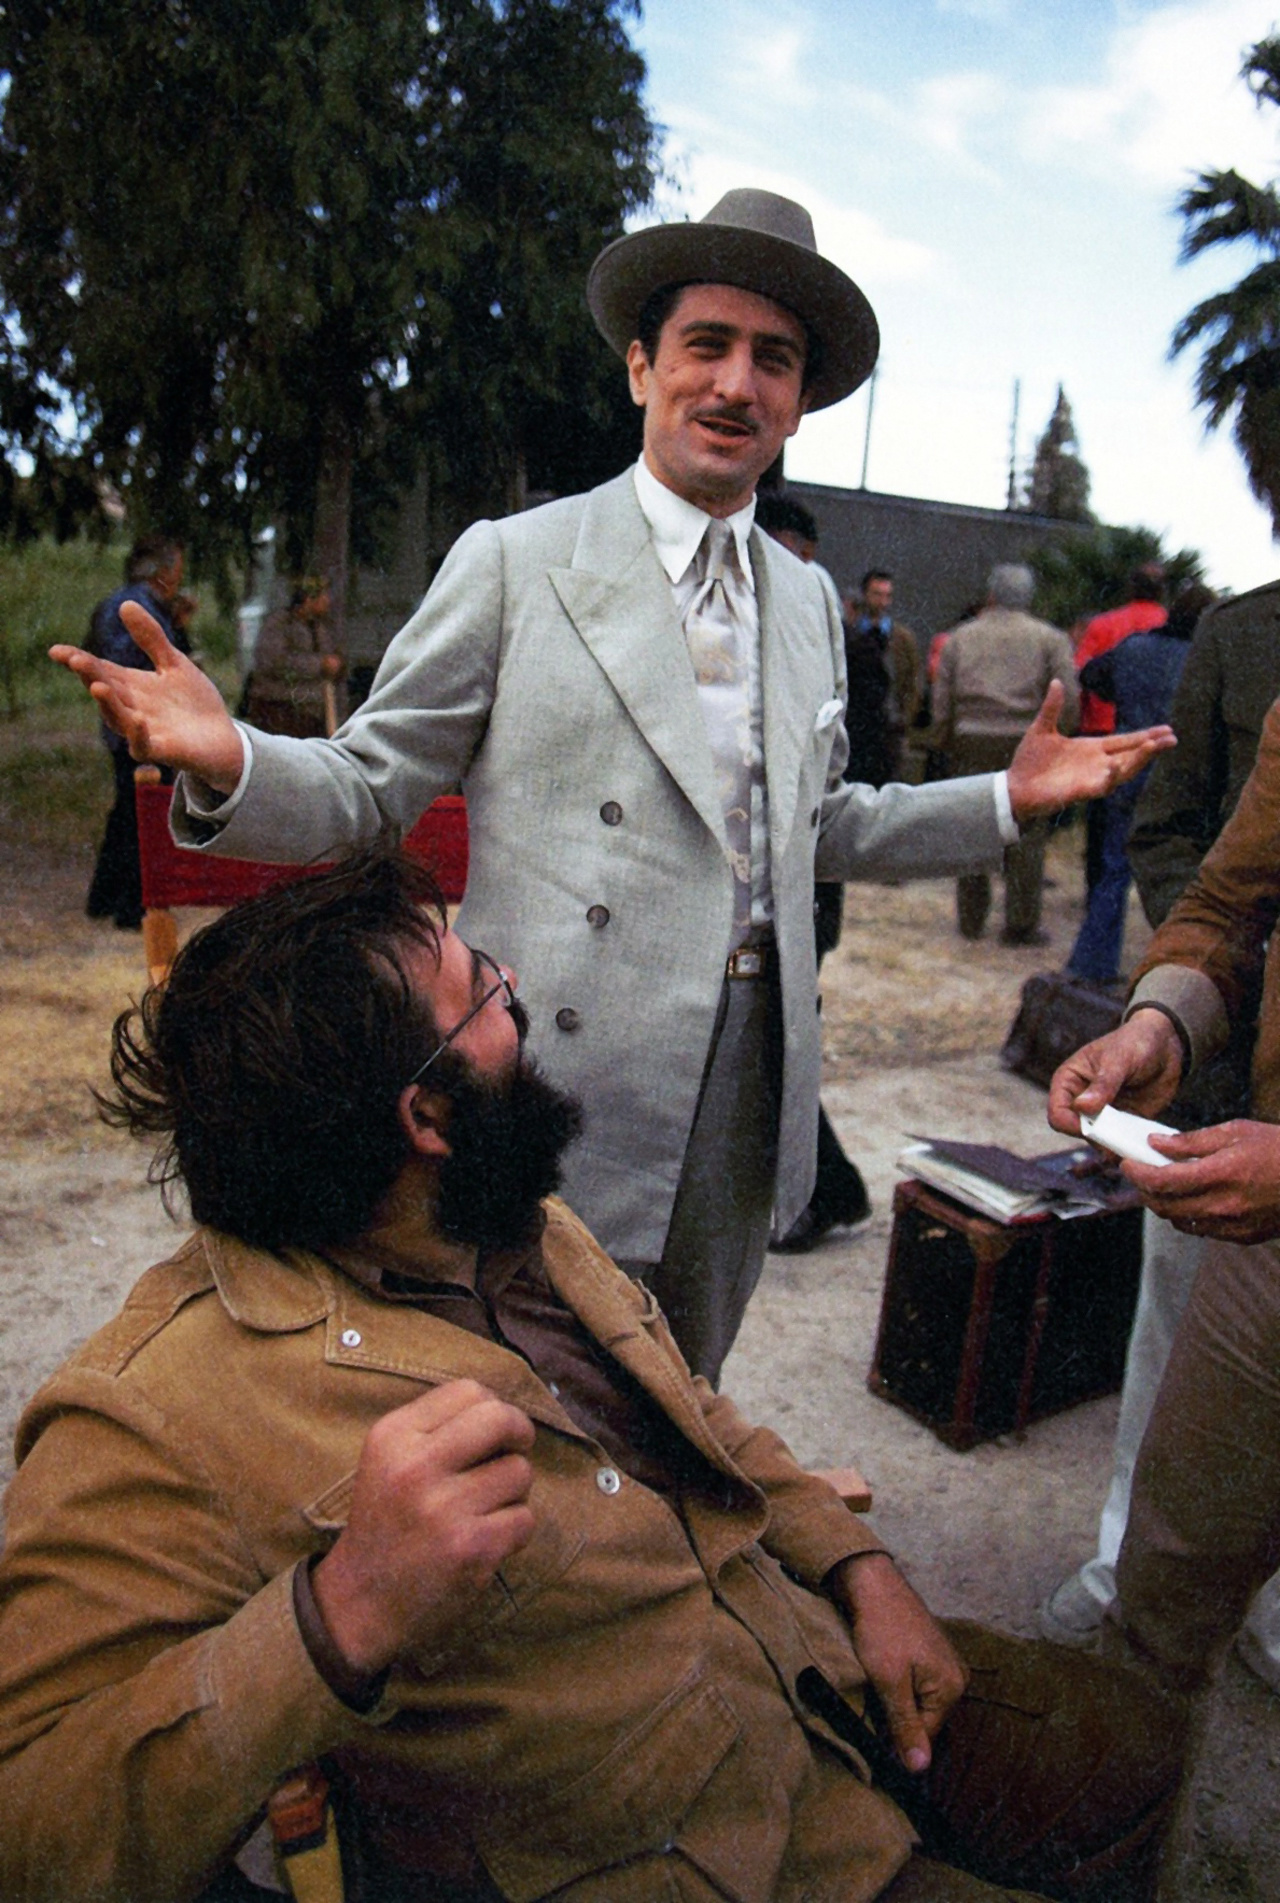 Actor Robert DeNiro and director Francis Ford Coppola share a light moment on the set of The Godfather: Part II.